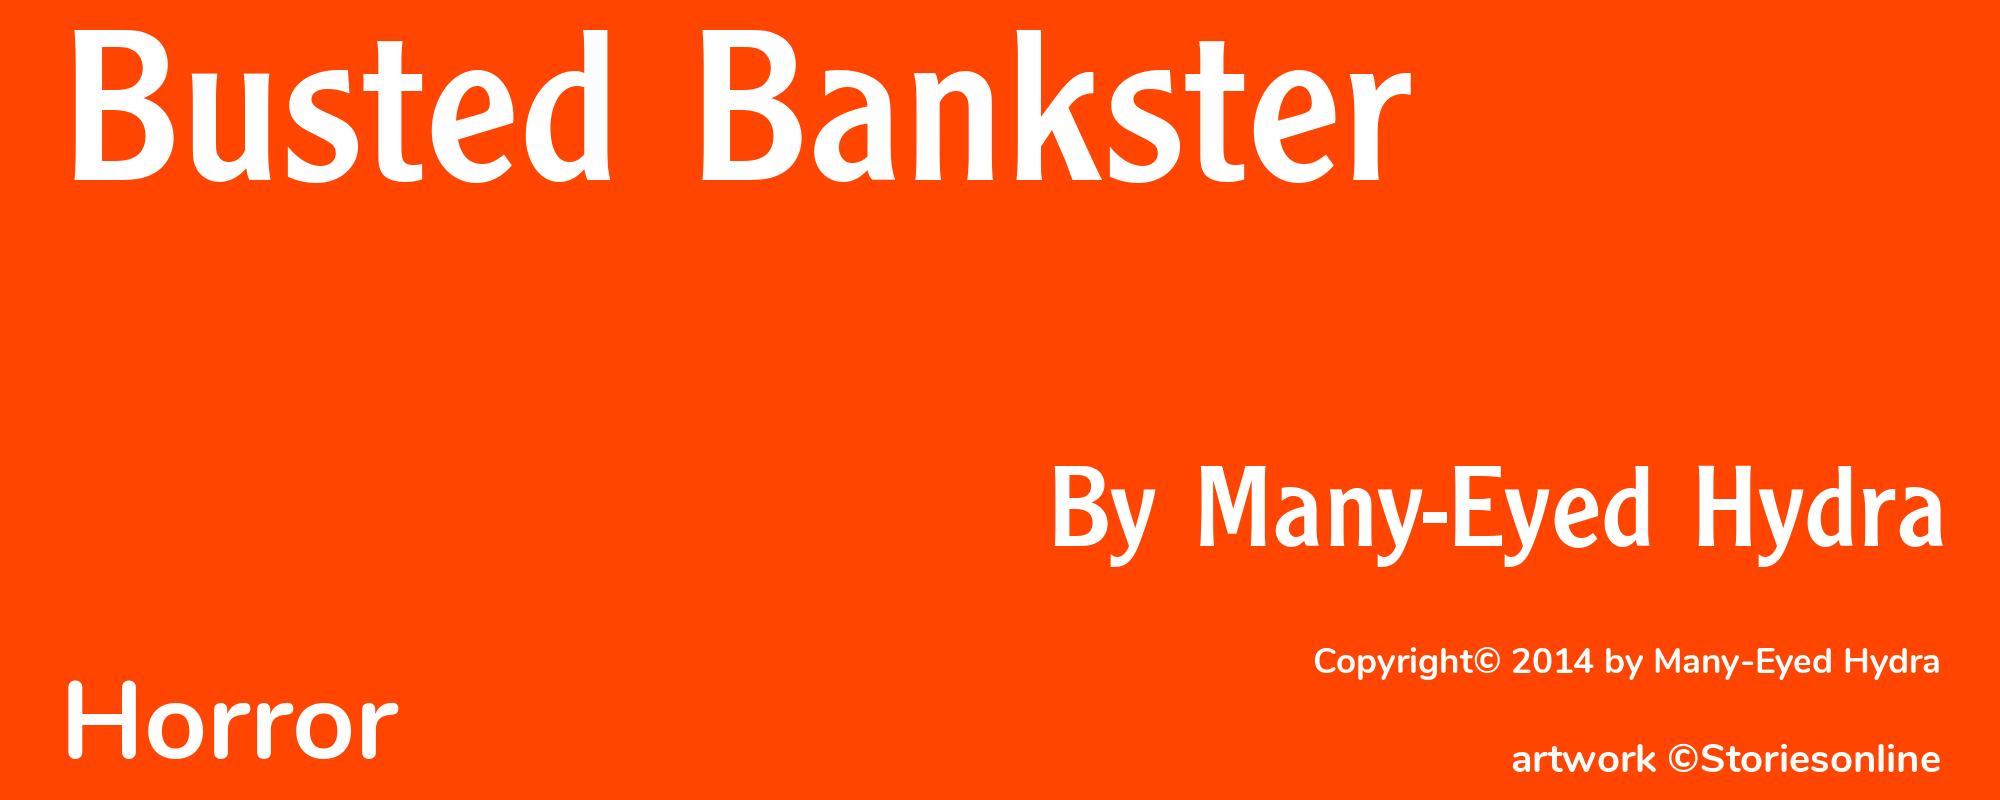 Busted Bankster - Cover